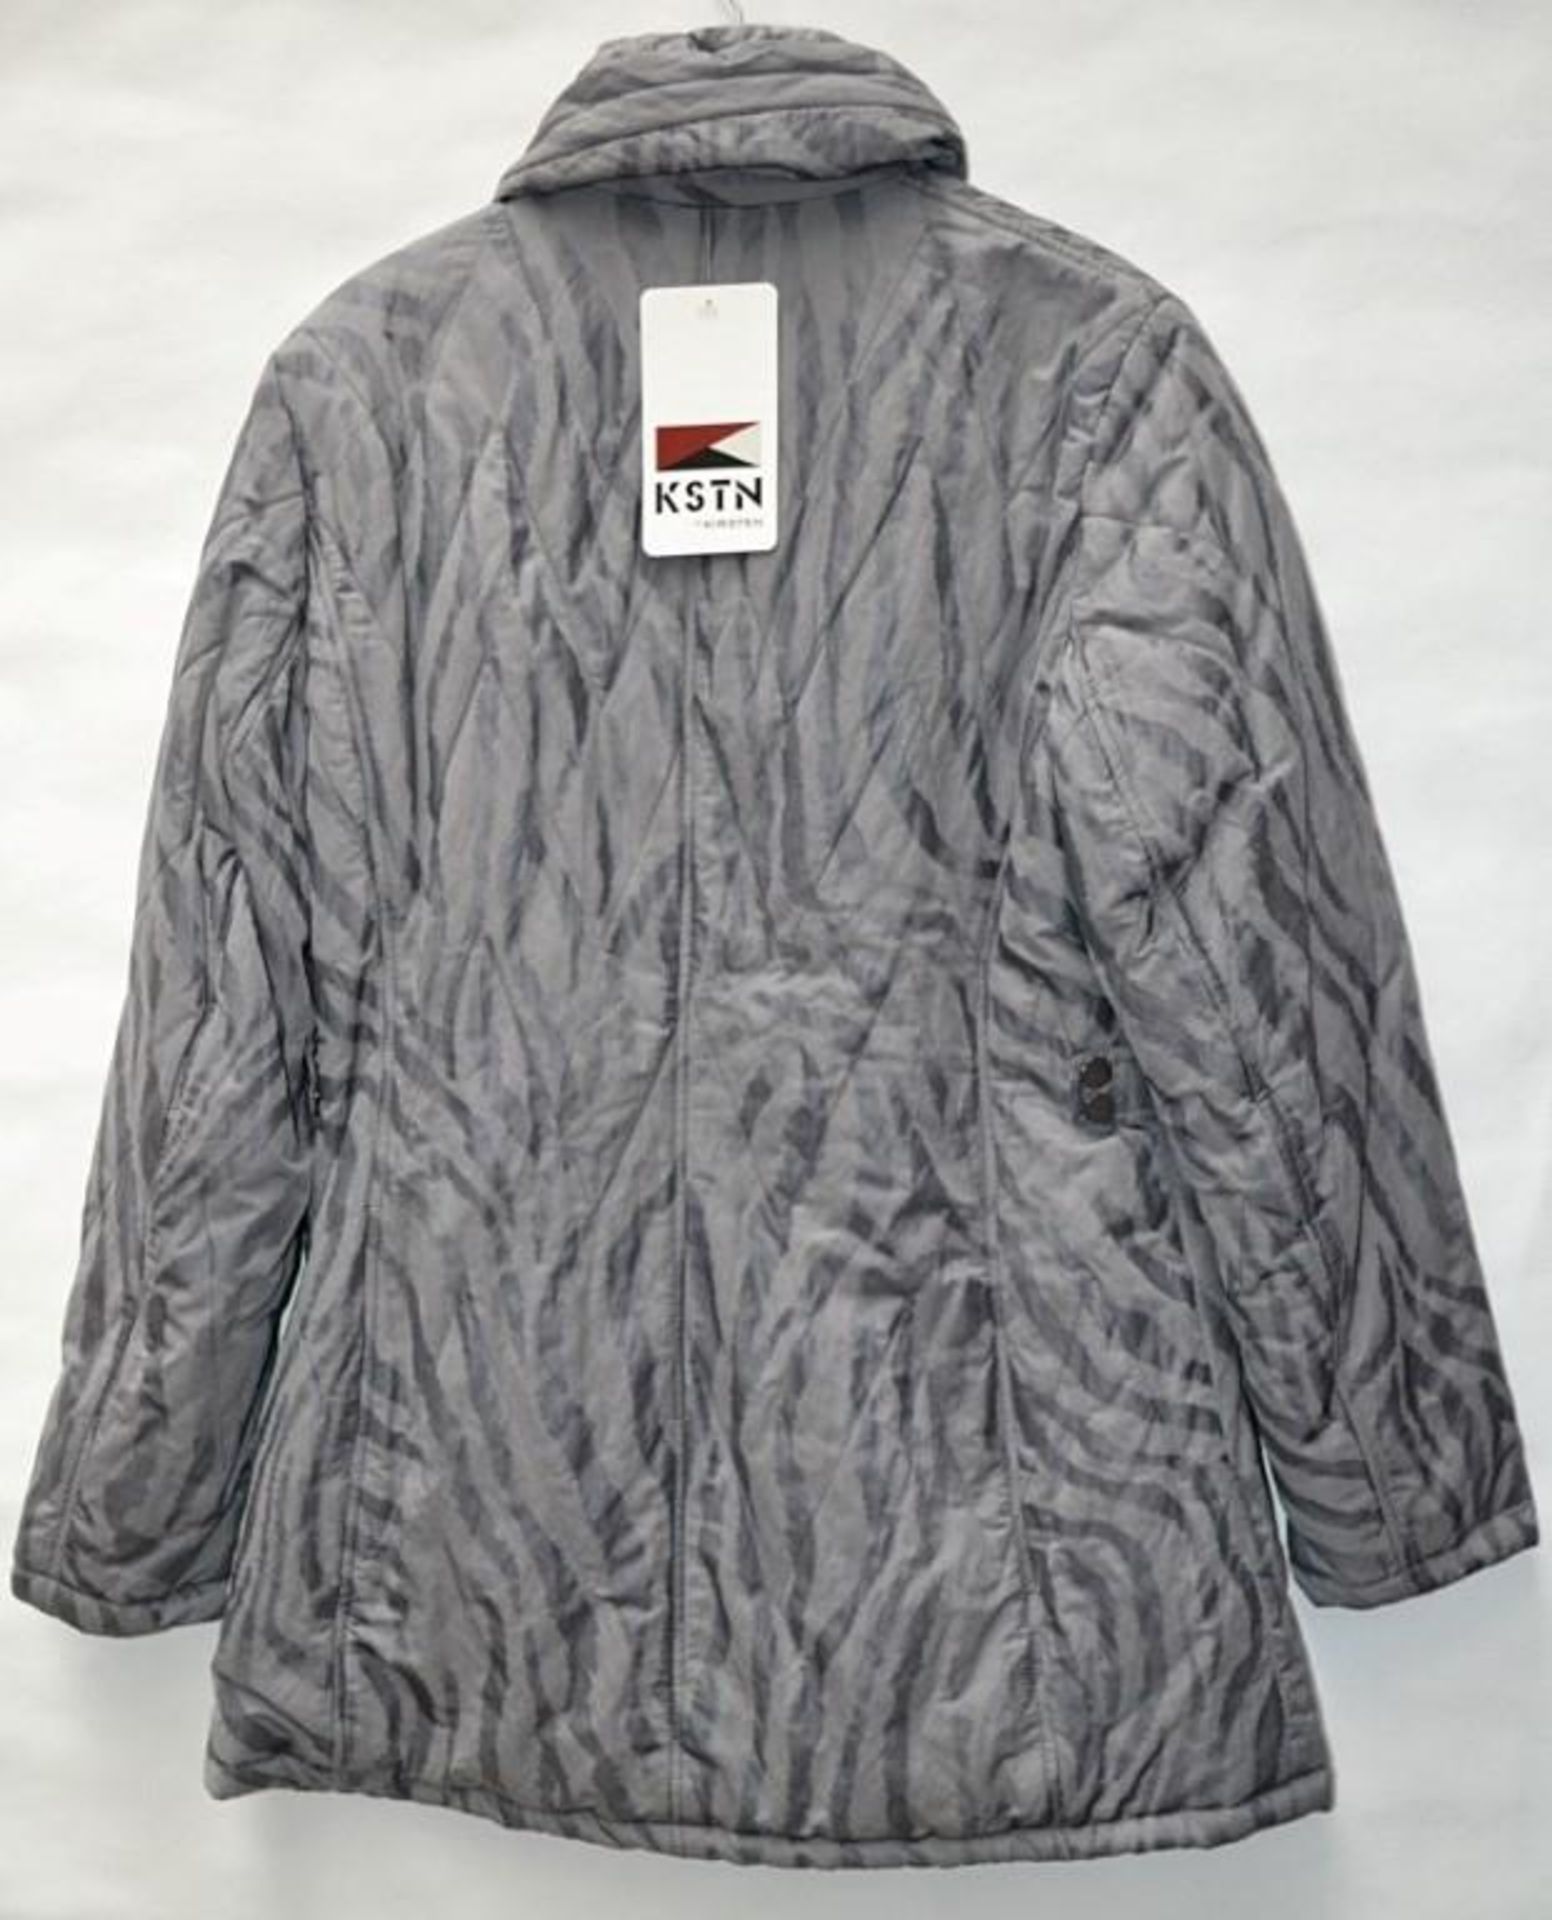 1 x Steilmann KSTN By Kirsten Womens Coat - Quilted Coat With Functional Pockets, Inner Pocket and A - Image 2 of 2